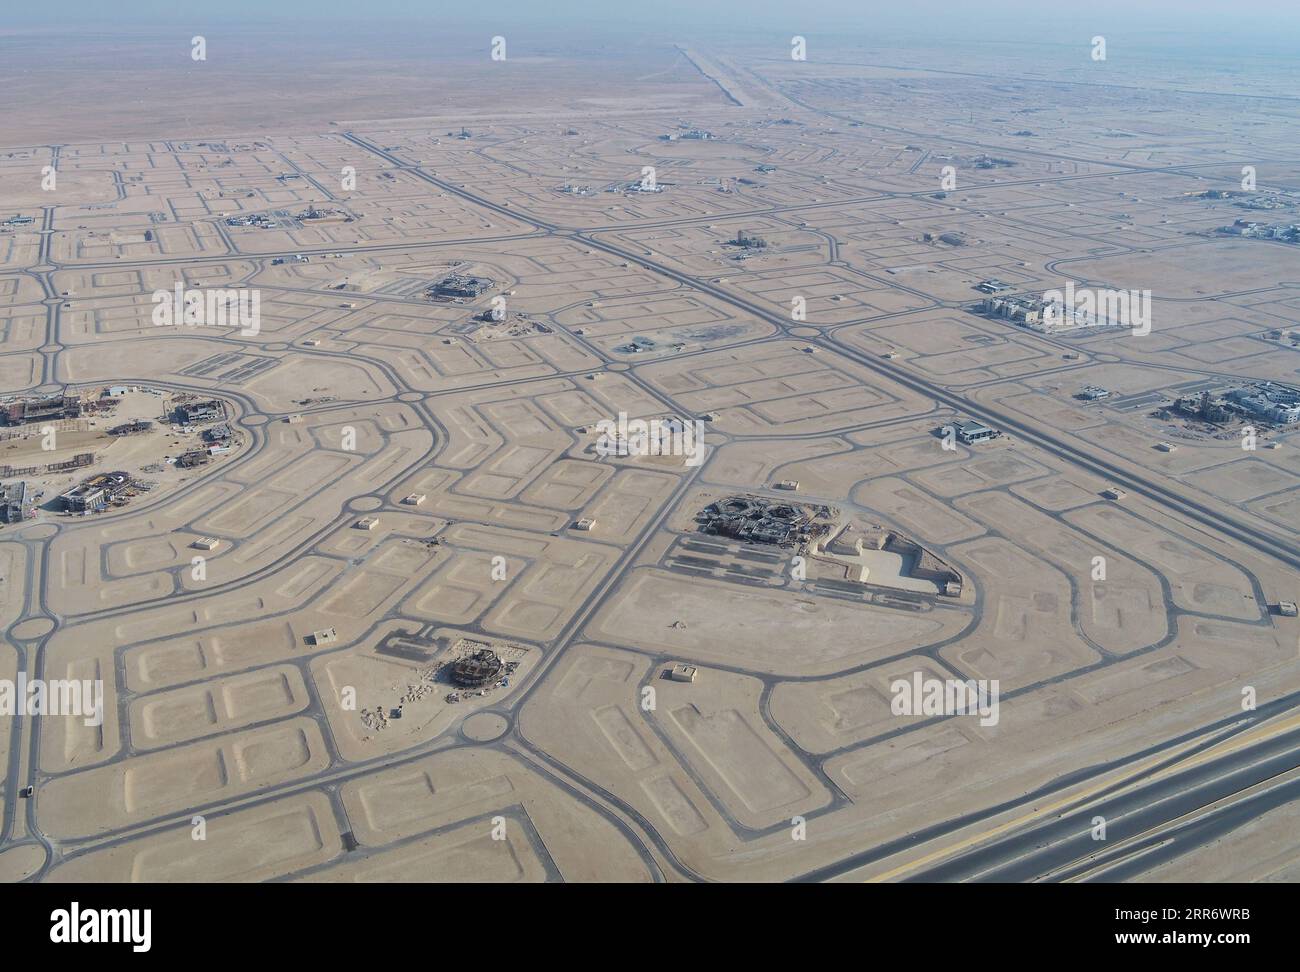 210302 -- JAHRA GOVERNORATE, March 2, 2021 -- Aerial photo taken on Feb. 27, 2021 shows the construction site of a project of China Gezhouba Group Corporation CGGC in a desert of Jahra Governorate, Kuwait. China Gezhouba Group Corporation CGGC, affiliated to China Energy Engineering Group Co., Ltd., handed over on Tuesday the second batch of its housing infrastructure project to the Kuwaiti side, marking the handover of the main works of the project. Photo by Chen Cichao/Xinhua KUWAIT-JAHRA GOVERNORATE-CHINESE COMPANY-PROJECT-HANDOVER NiexYunpeng PUBLICATIONxNOTxINxCHN Stock Photo